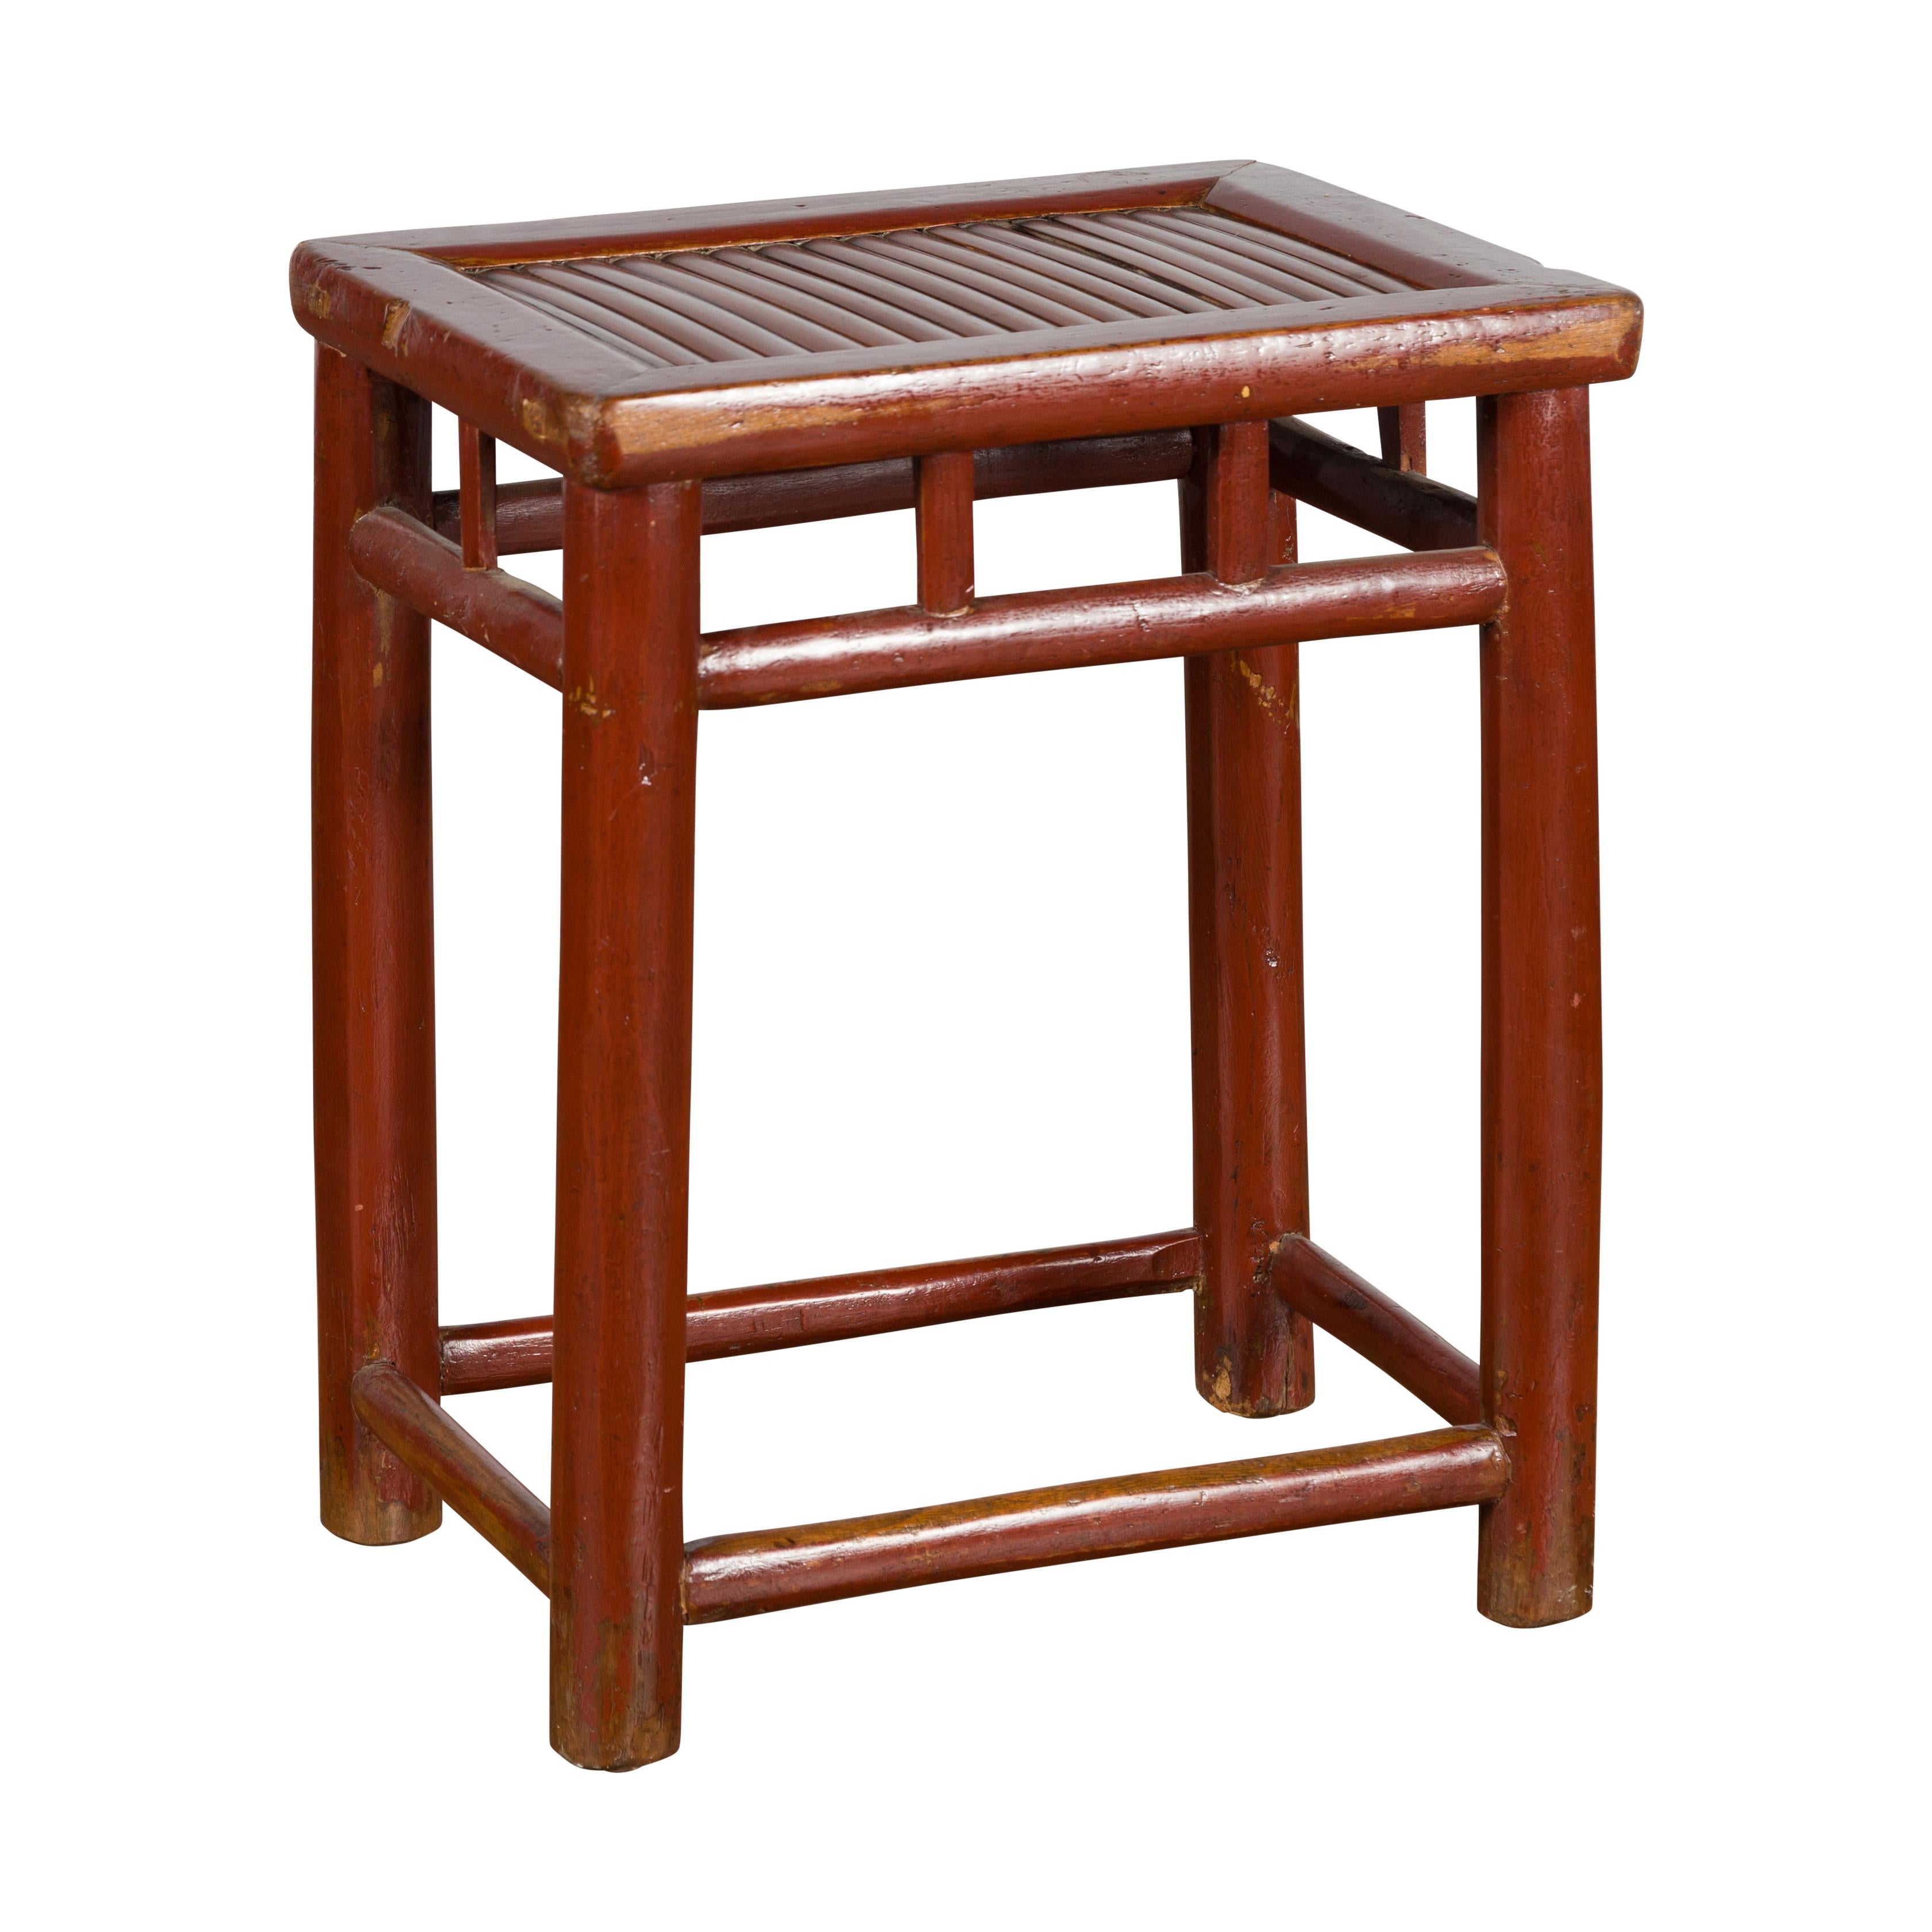 A Chinese reddish brown lacquered stool from the early 20th century, with bamboo seat and pillar strut motifs. Created in China during the early years of the 20th century, this wooden stool features a rectangular top with bamboo seat, resting above